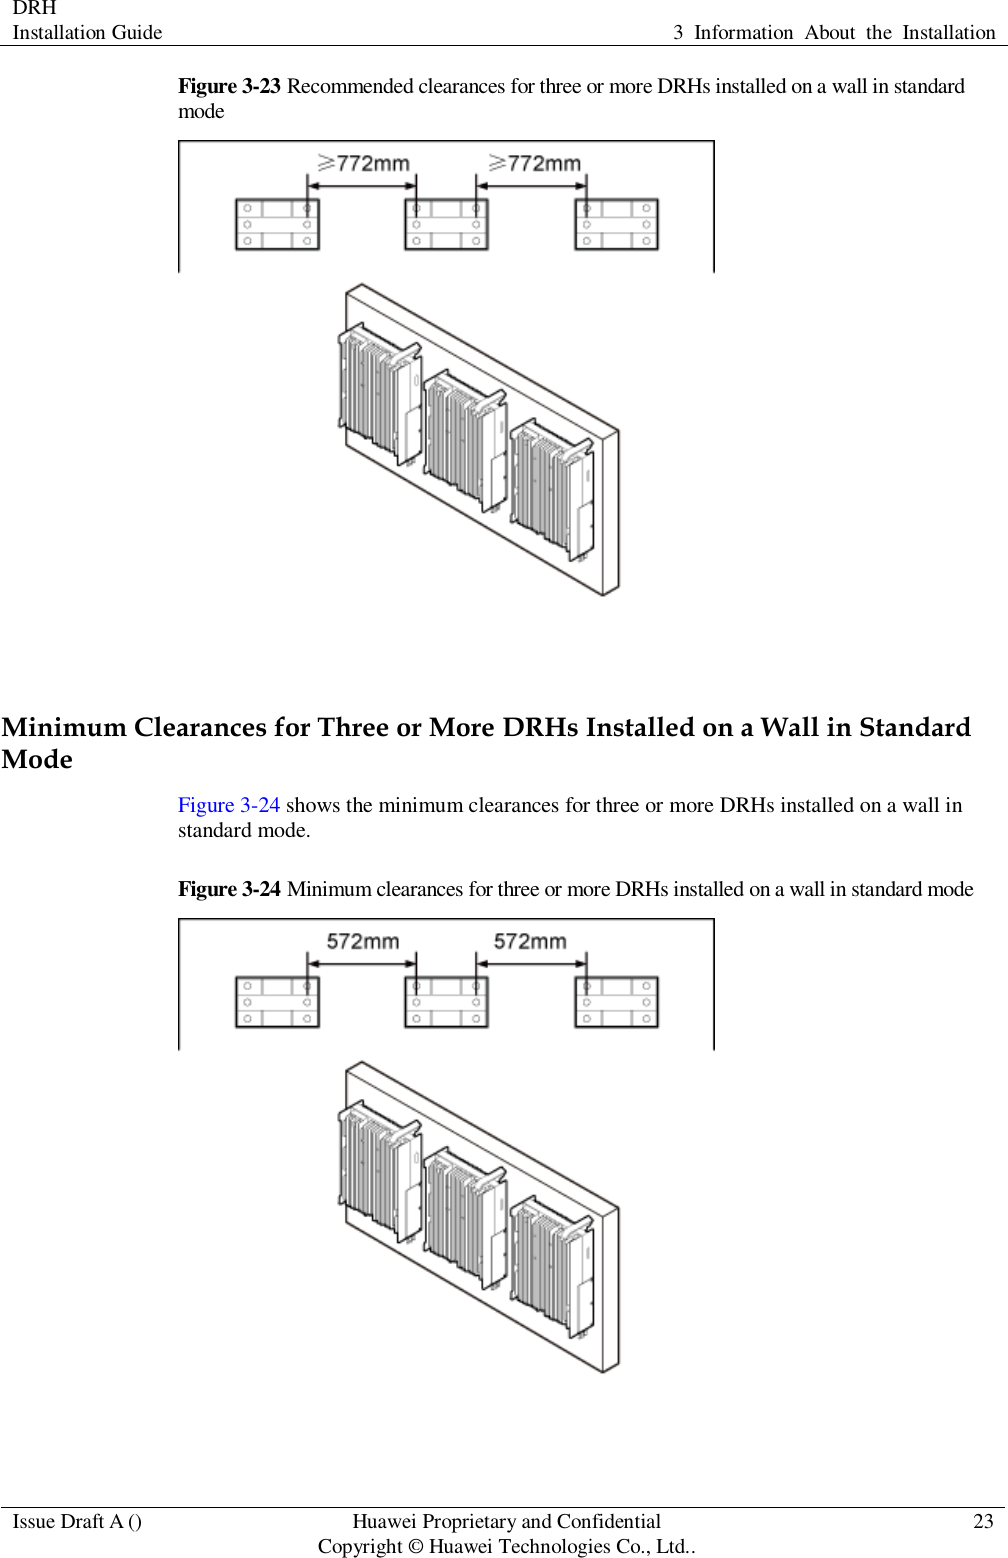 DRH   Installation Guide 3  Information  About  the  Installation  Issue Draft A () Huawei Proprietary and Confidential                                     Copyright © Huawei Technologies Co., Ltd.. 23  Figure 3-23 Recommended clearances for three or more DRHs installed on a wall in standard mode   Minimum Clearances for Three or More DRHs Installed on a Wall in Standard Mode Figure 3-24 shows the minimum clearances for three or more DRHs installed on a wall in standard mode. Figure 3-24 Minimum clearances for three or more DRHs installed on a wall in standard mode   